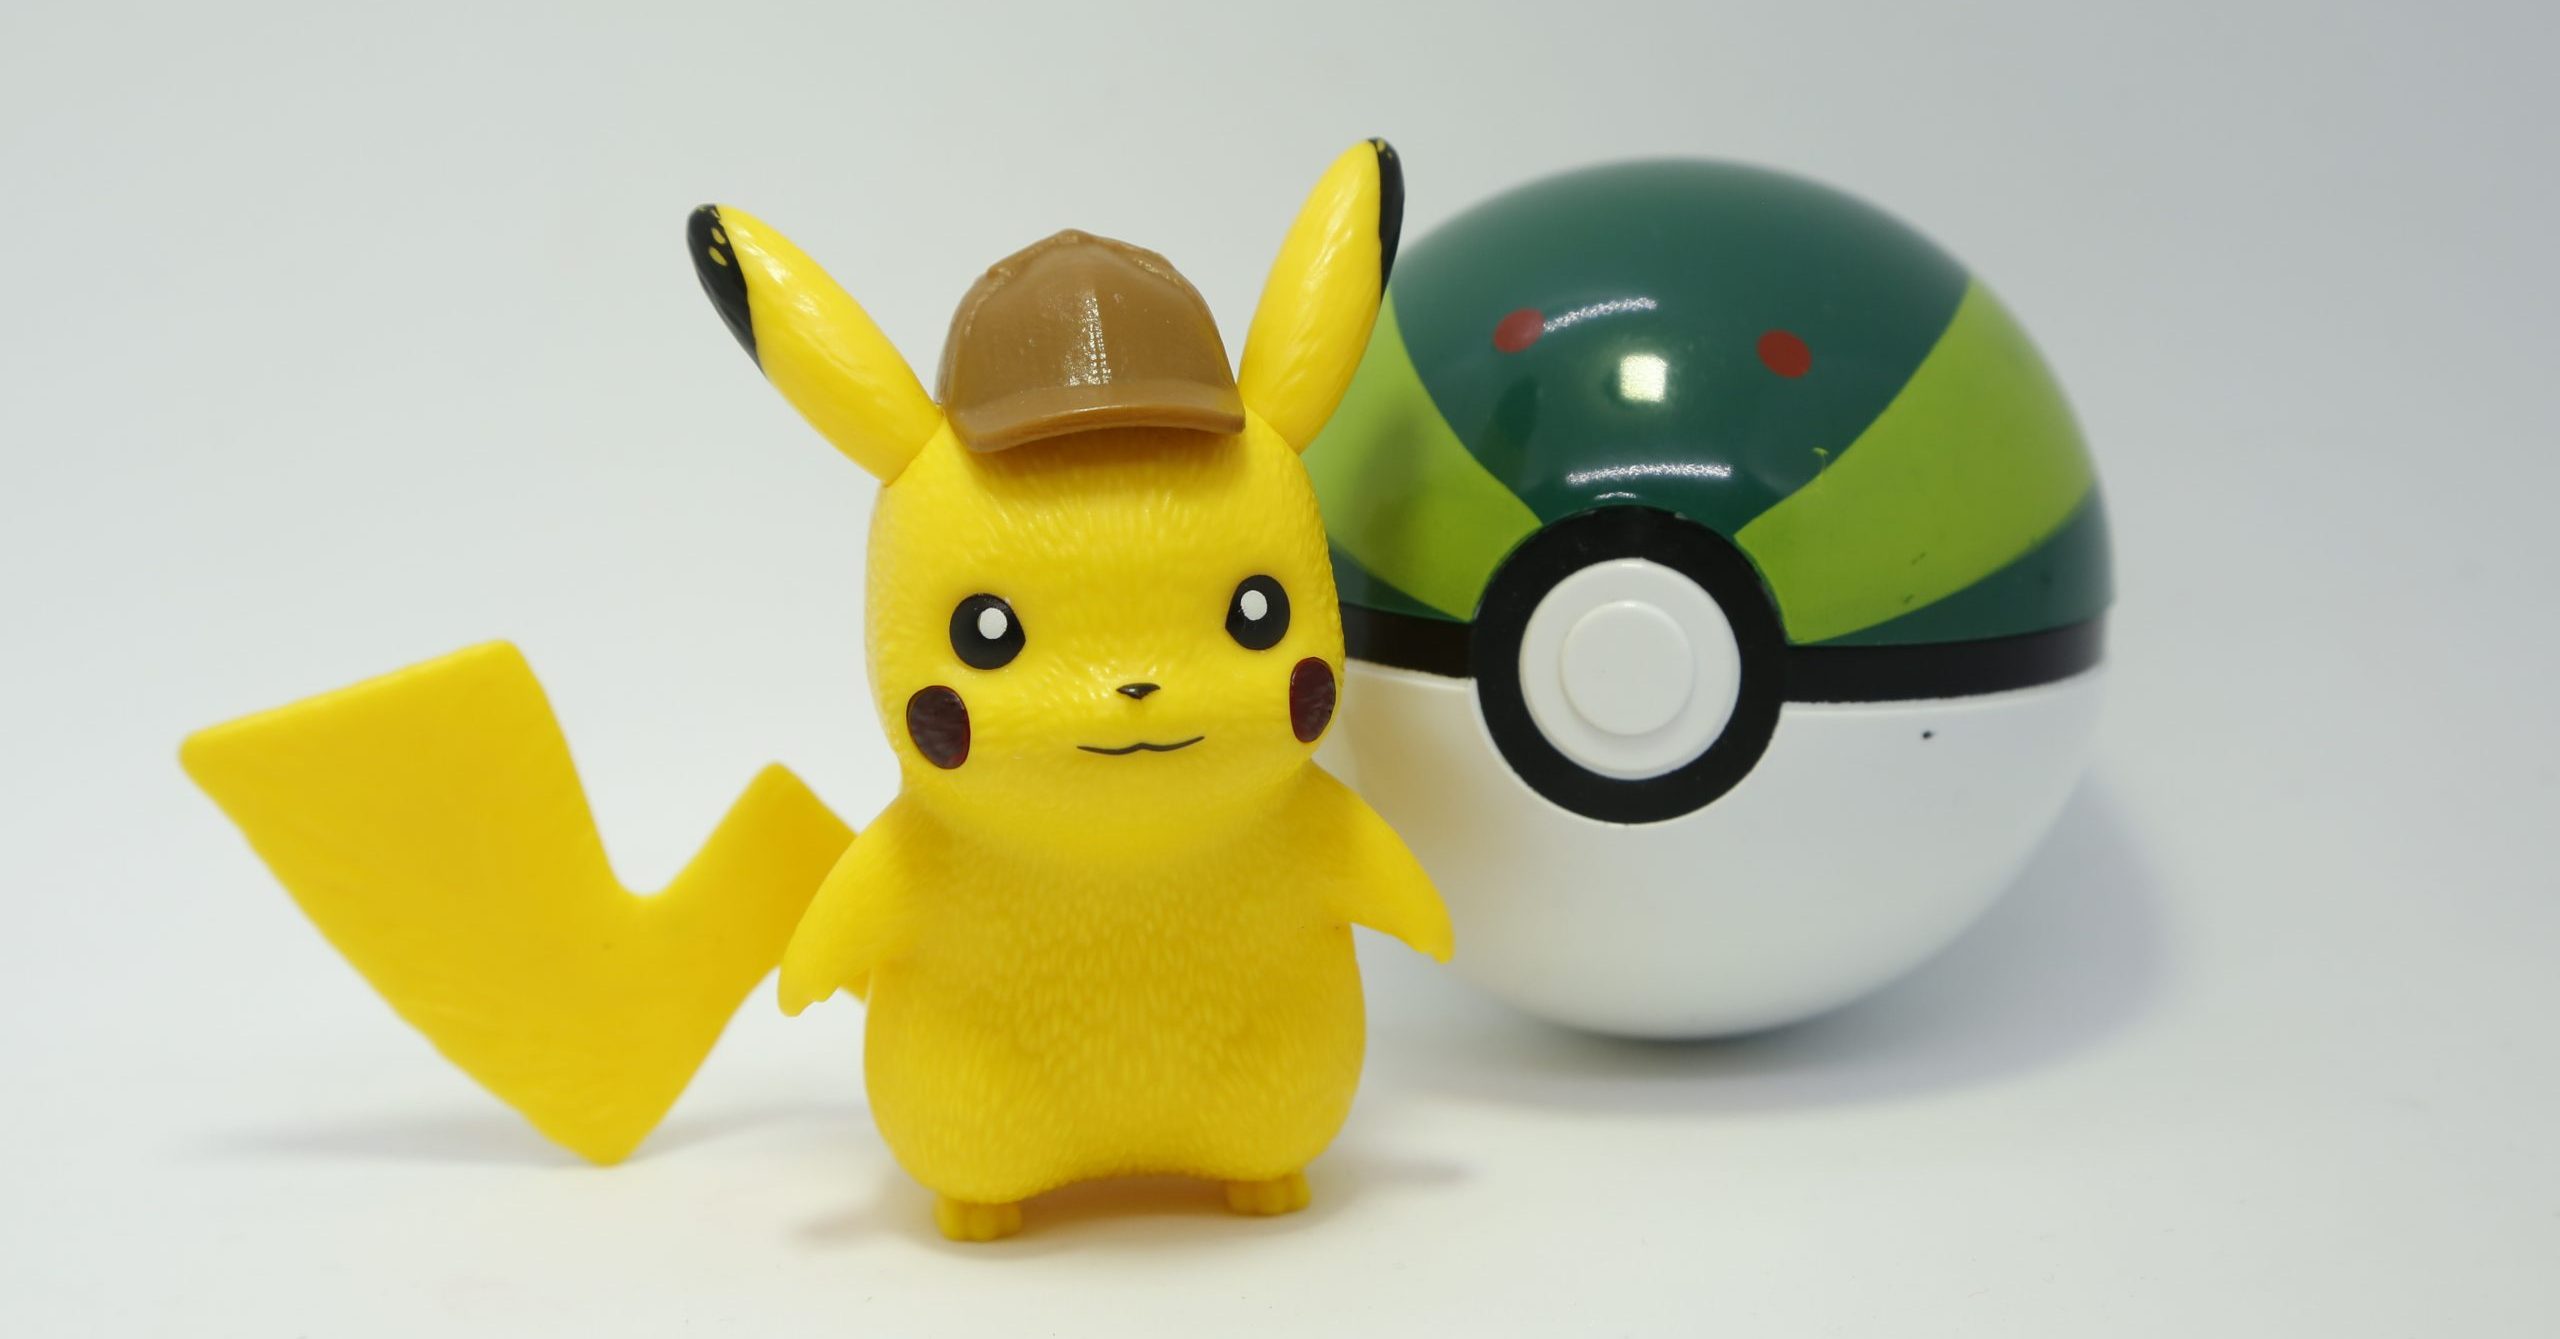 Is Pokémon Go a New Target for Hackers?